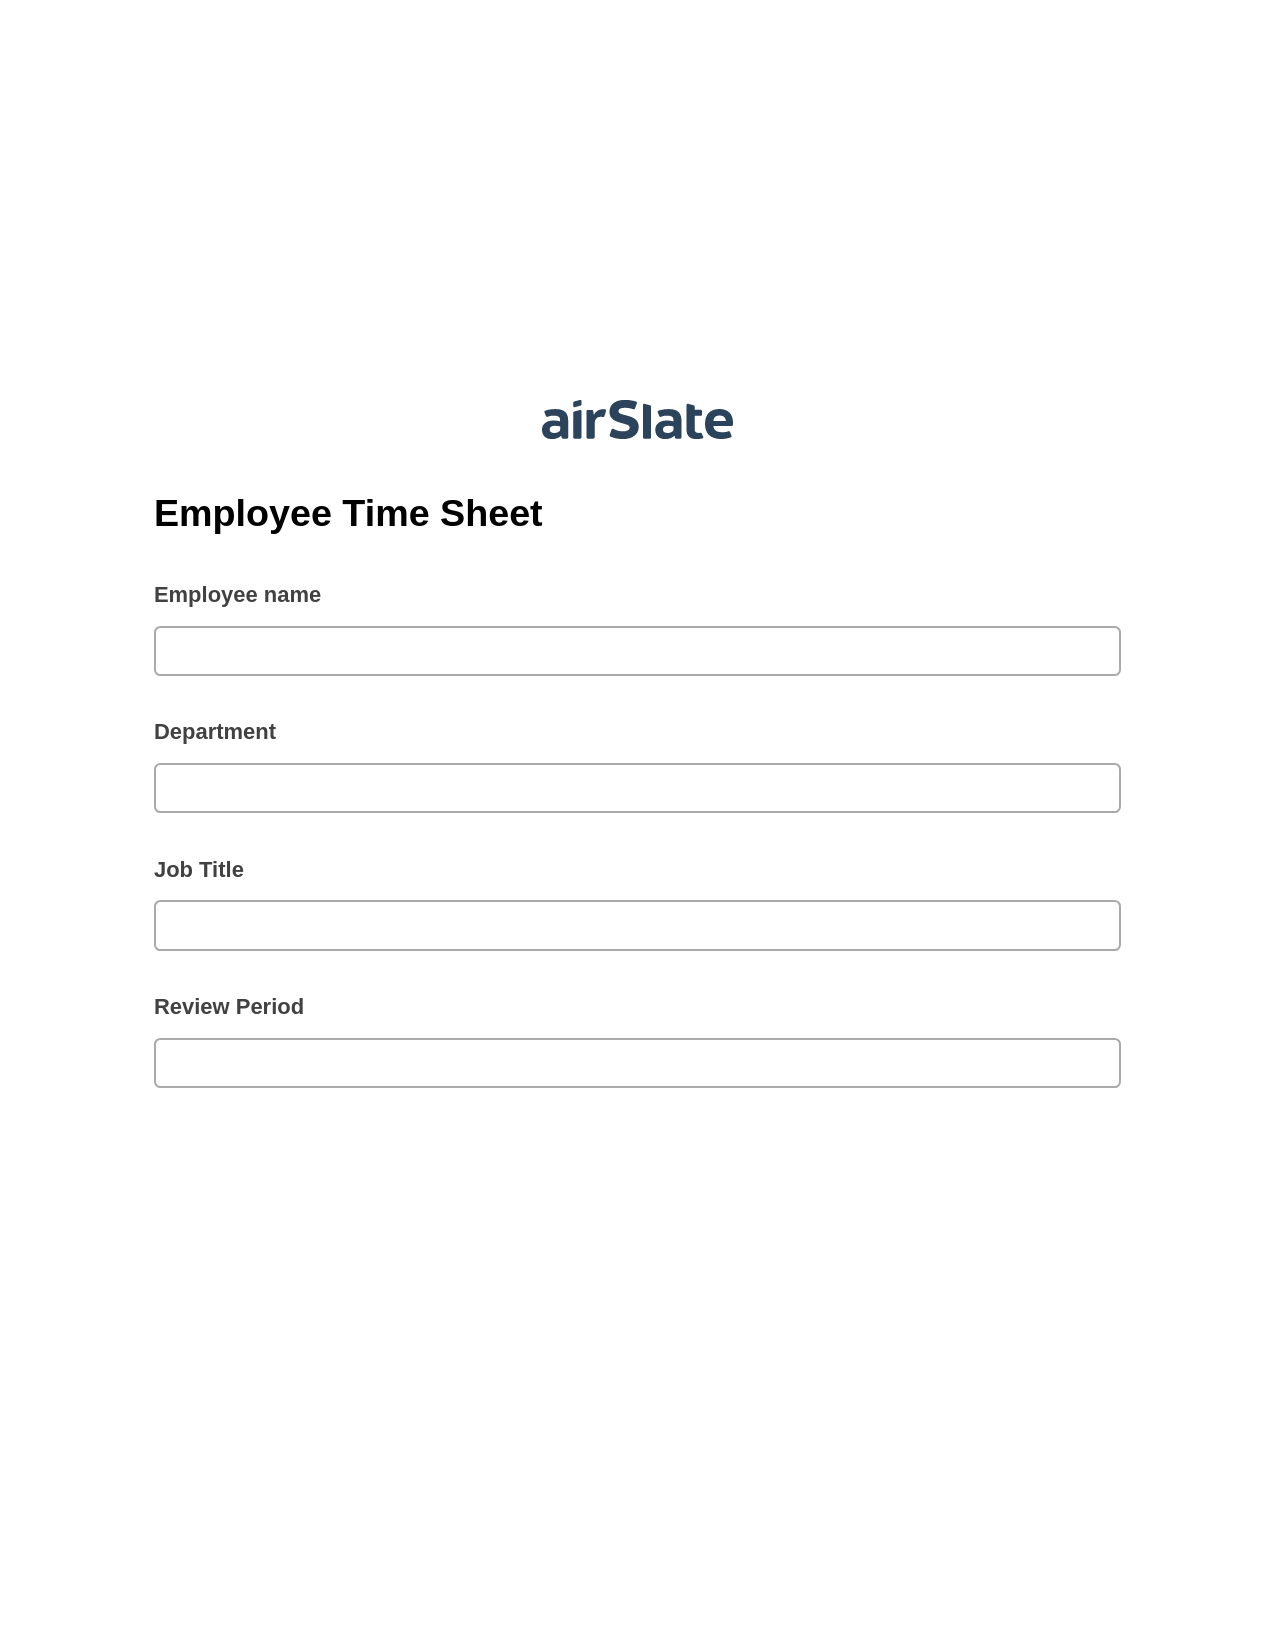 Multirole Employee Time Sheet Pre-fill from Office 365 Excel Bot, System Bot - Create a Slate in another Flow, Export to WebMerge Bot